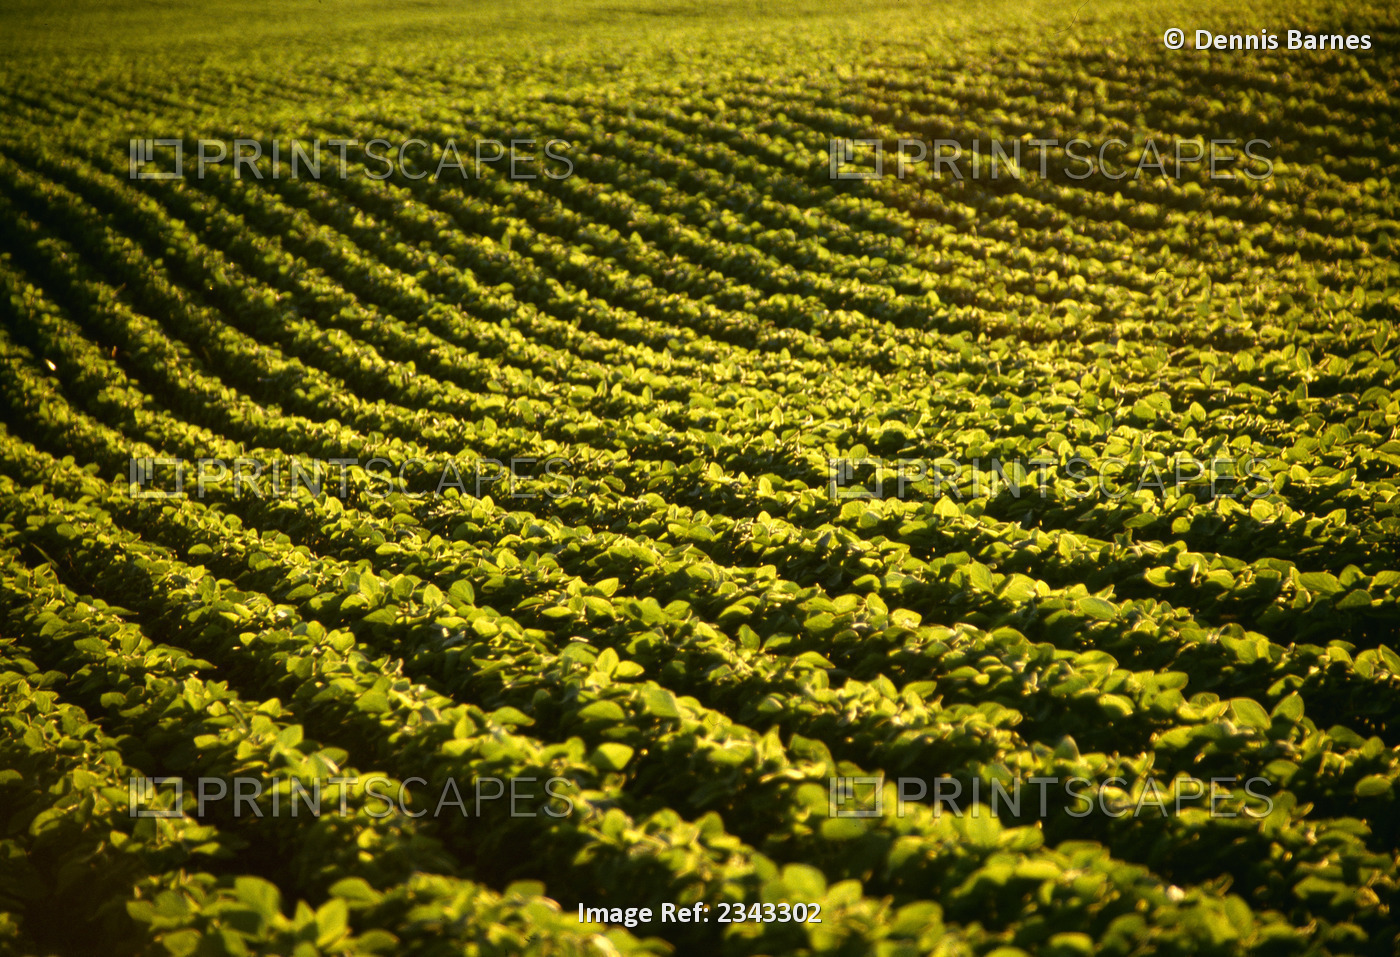 Agriculture - Soybeans, mid-growth stage / Ohio, USA.